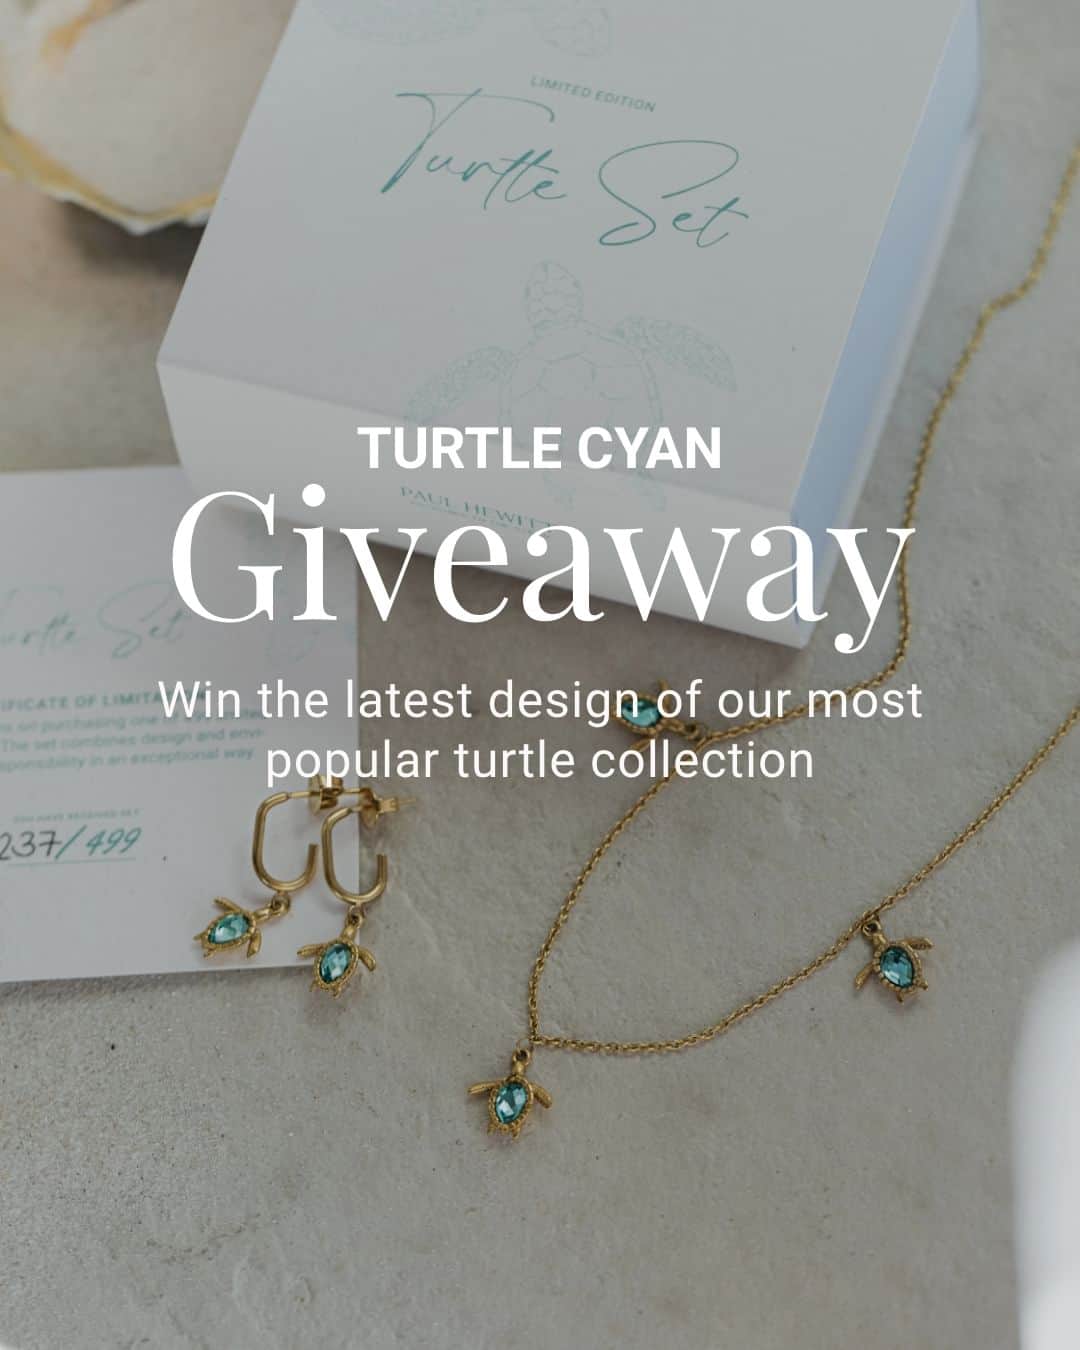 PAUL HEWITTのインスタグラム：「- GIVEAWAY CLOSED -  WIN OUR NEW AND LIMITED TURTLE CYAN SET  TURTLE CYAN has quickly become our most popular Turtle Collection. This is your chance to win our latest set consisting of the necklace with three turtles and the classic hoops.  All you have to do is 1. Follow @paul_hewitt 2. share this post in your story 3. Tag your bestie (multiple entries possible)  The winners will be chosen at random and notified via DM on monday August 28th.  To participate you must be a resident in Germany and at least 18 years old. This giveaway is in no way sponsored, associated or affiliated with Instagram, META or Facebook. Legal recourse is excluded. There is no guarantee and no cash payment of the prize. The winning data will not be passed to third parties and will only be used for sending the prize.」